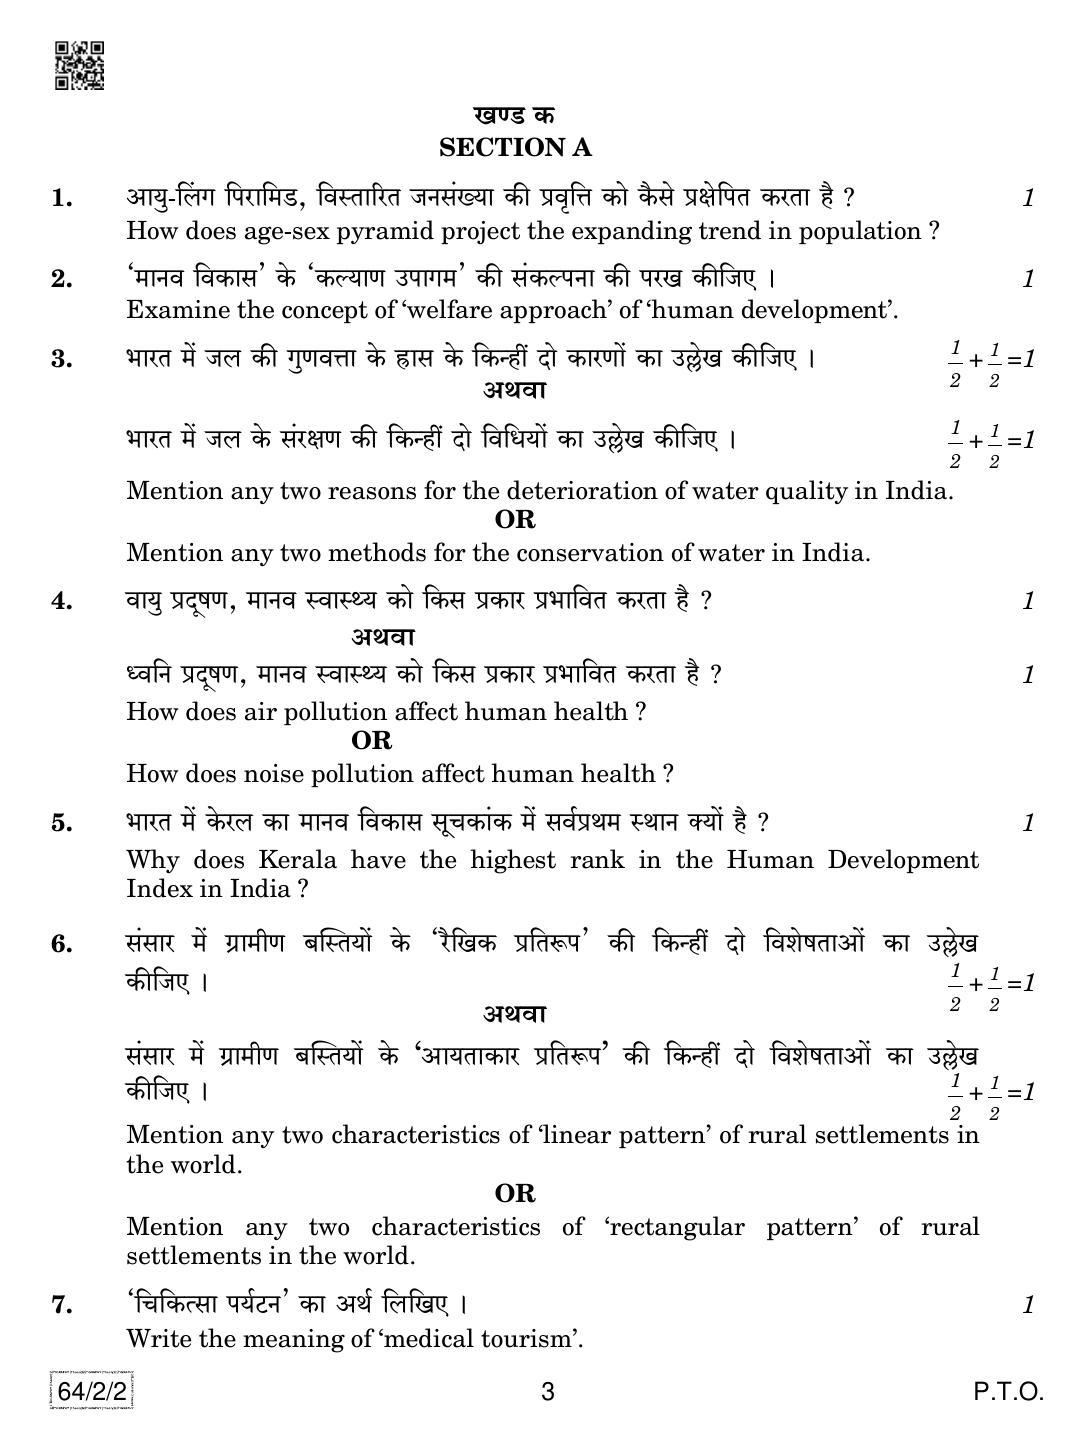 CBSE Class 12 64-2-2 Geography 2019 Question Paper - Page 3